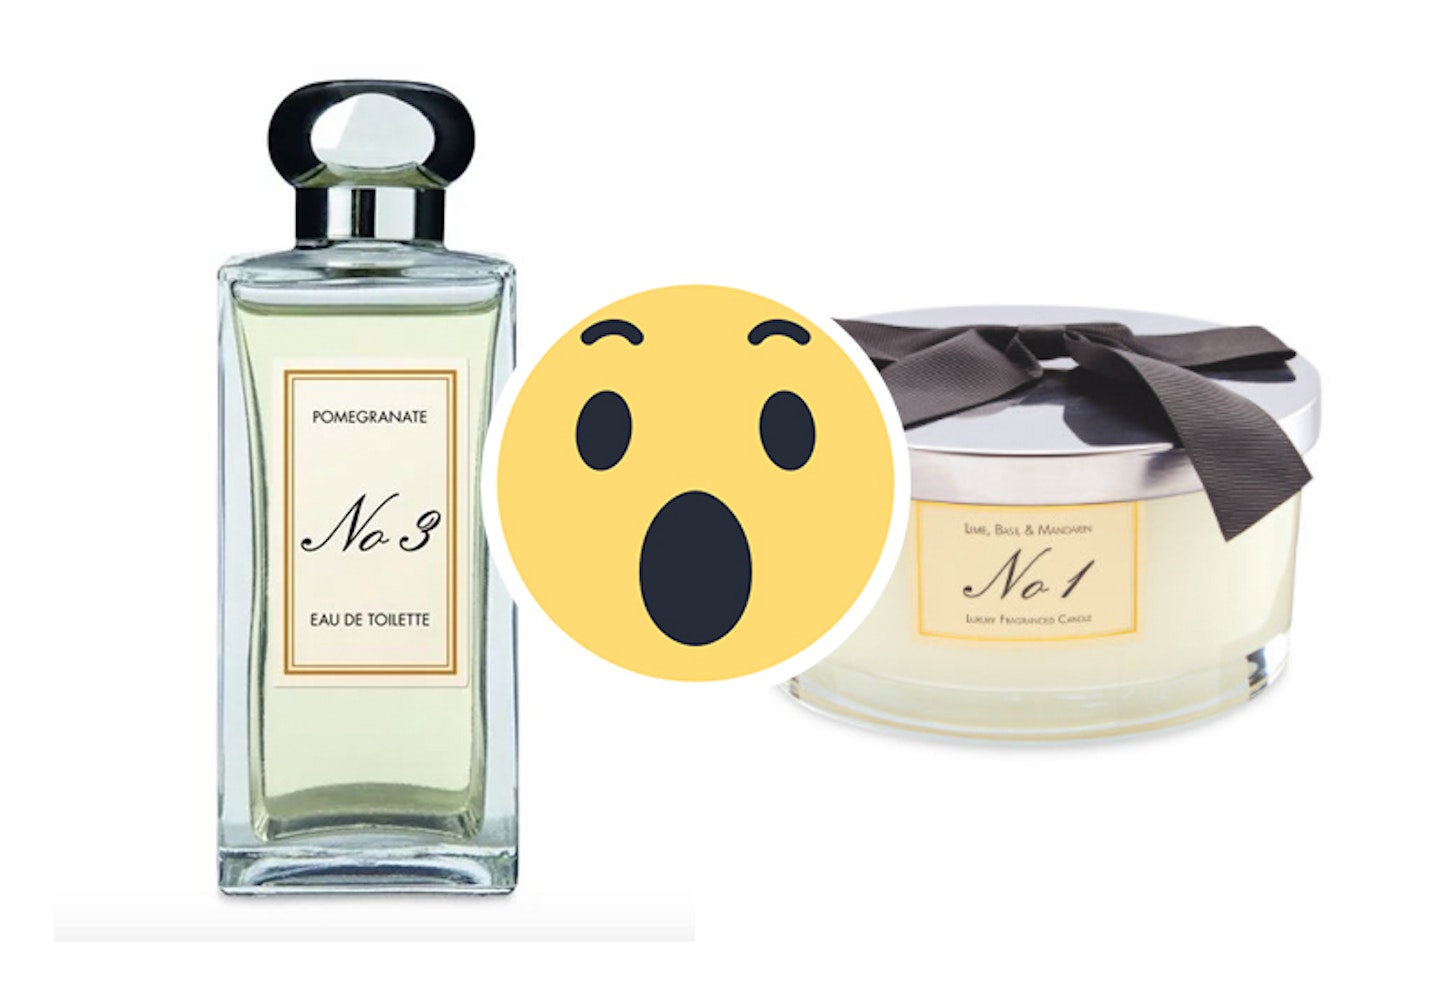 Aldi launches Jo Malone inspired products in time for Mother’s Day and prices start at £2.99